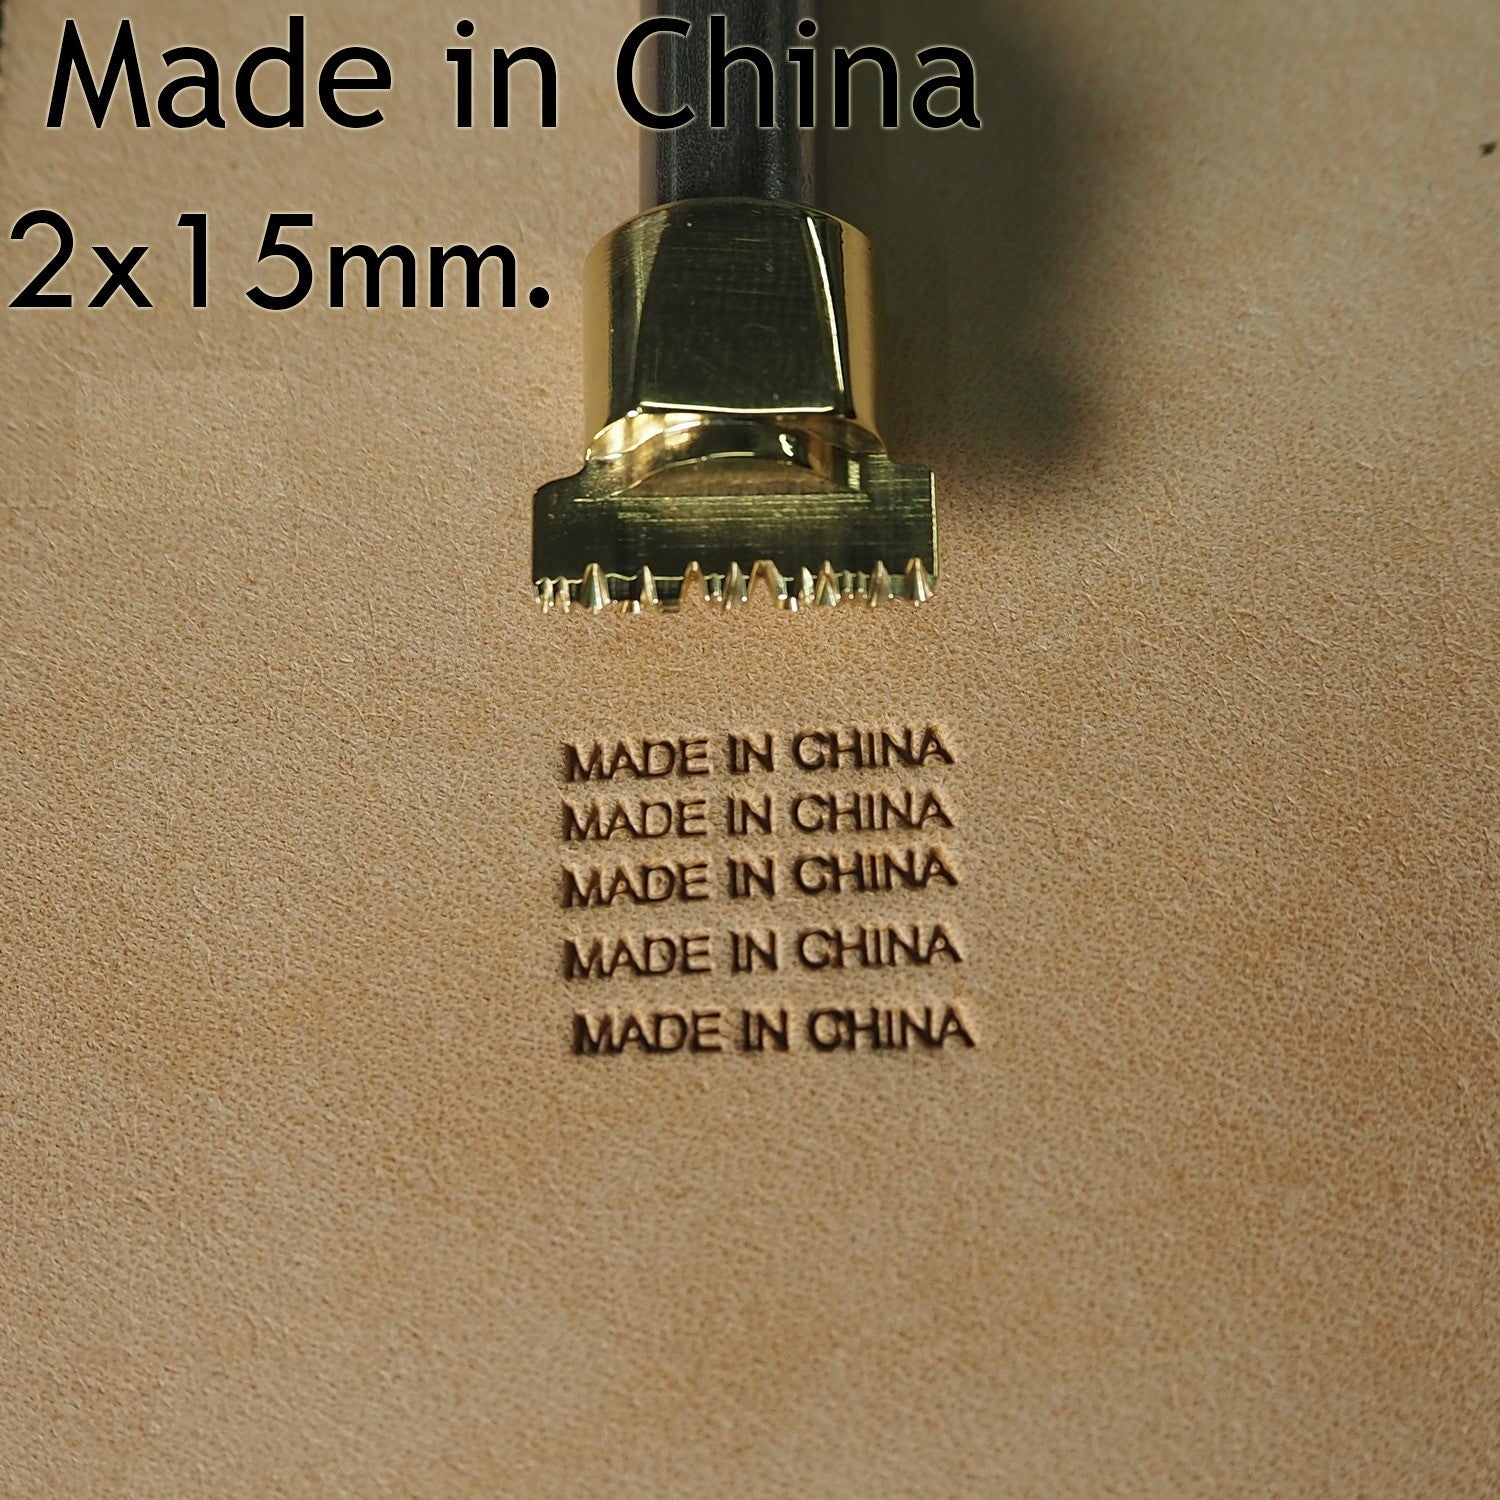 #Made In China - Leather Crafting Stamp Tool